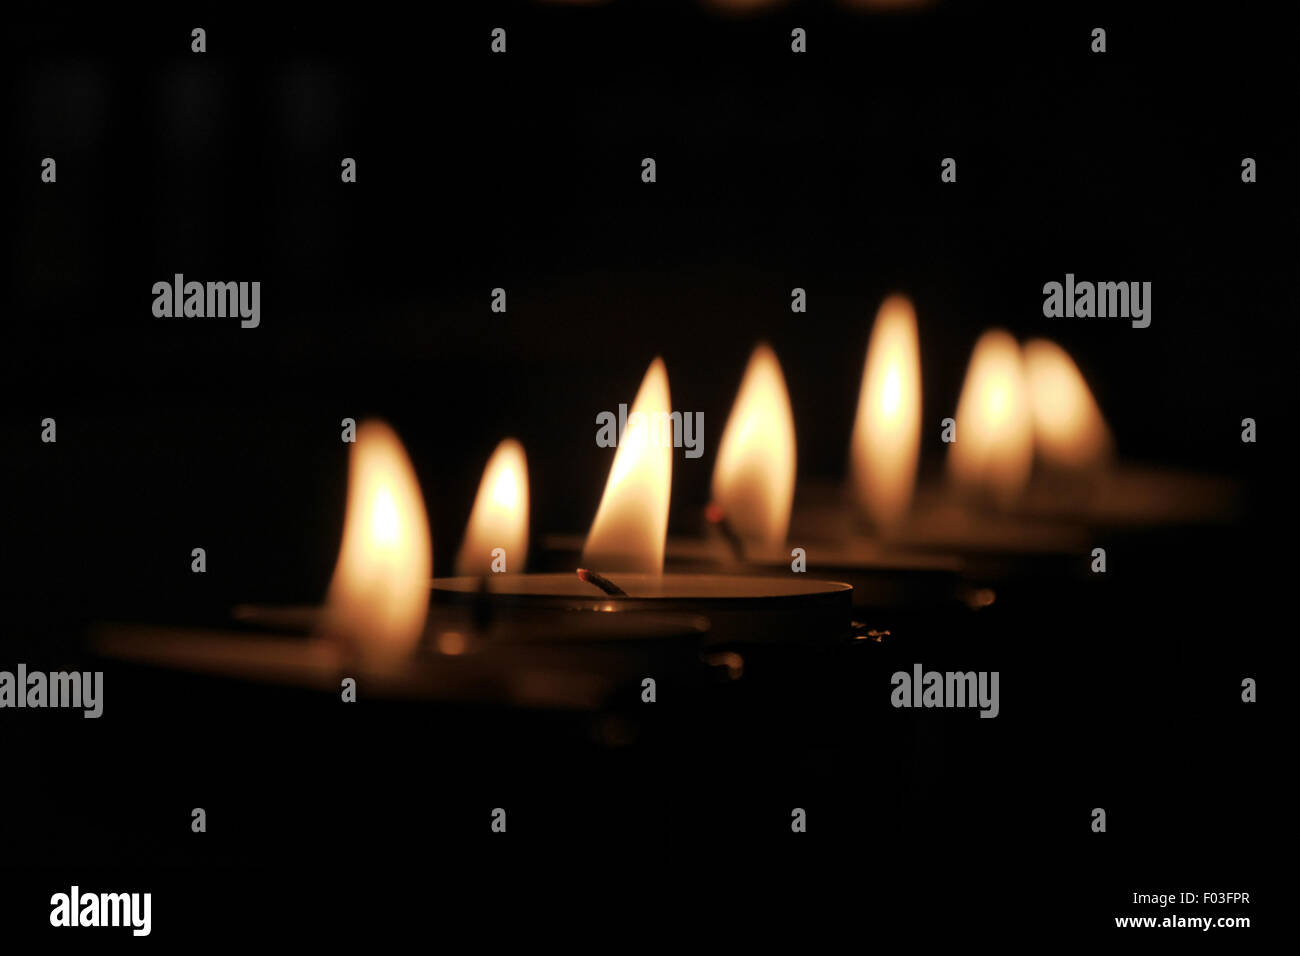 Warm glow of tealight flames burning in the darkness Stock Photo